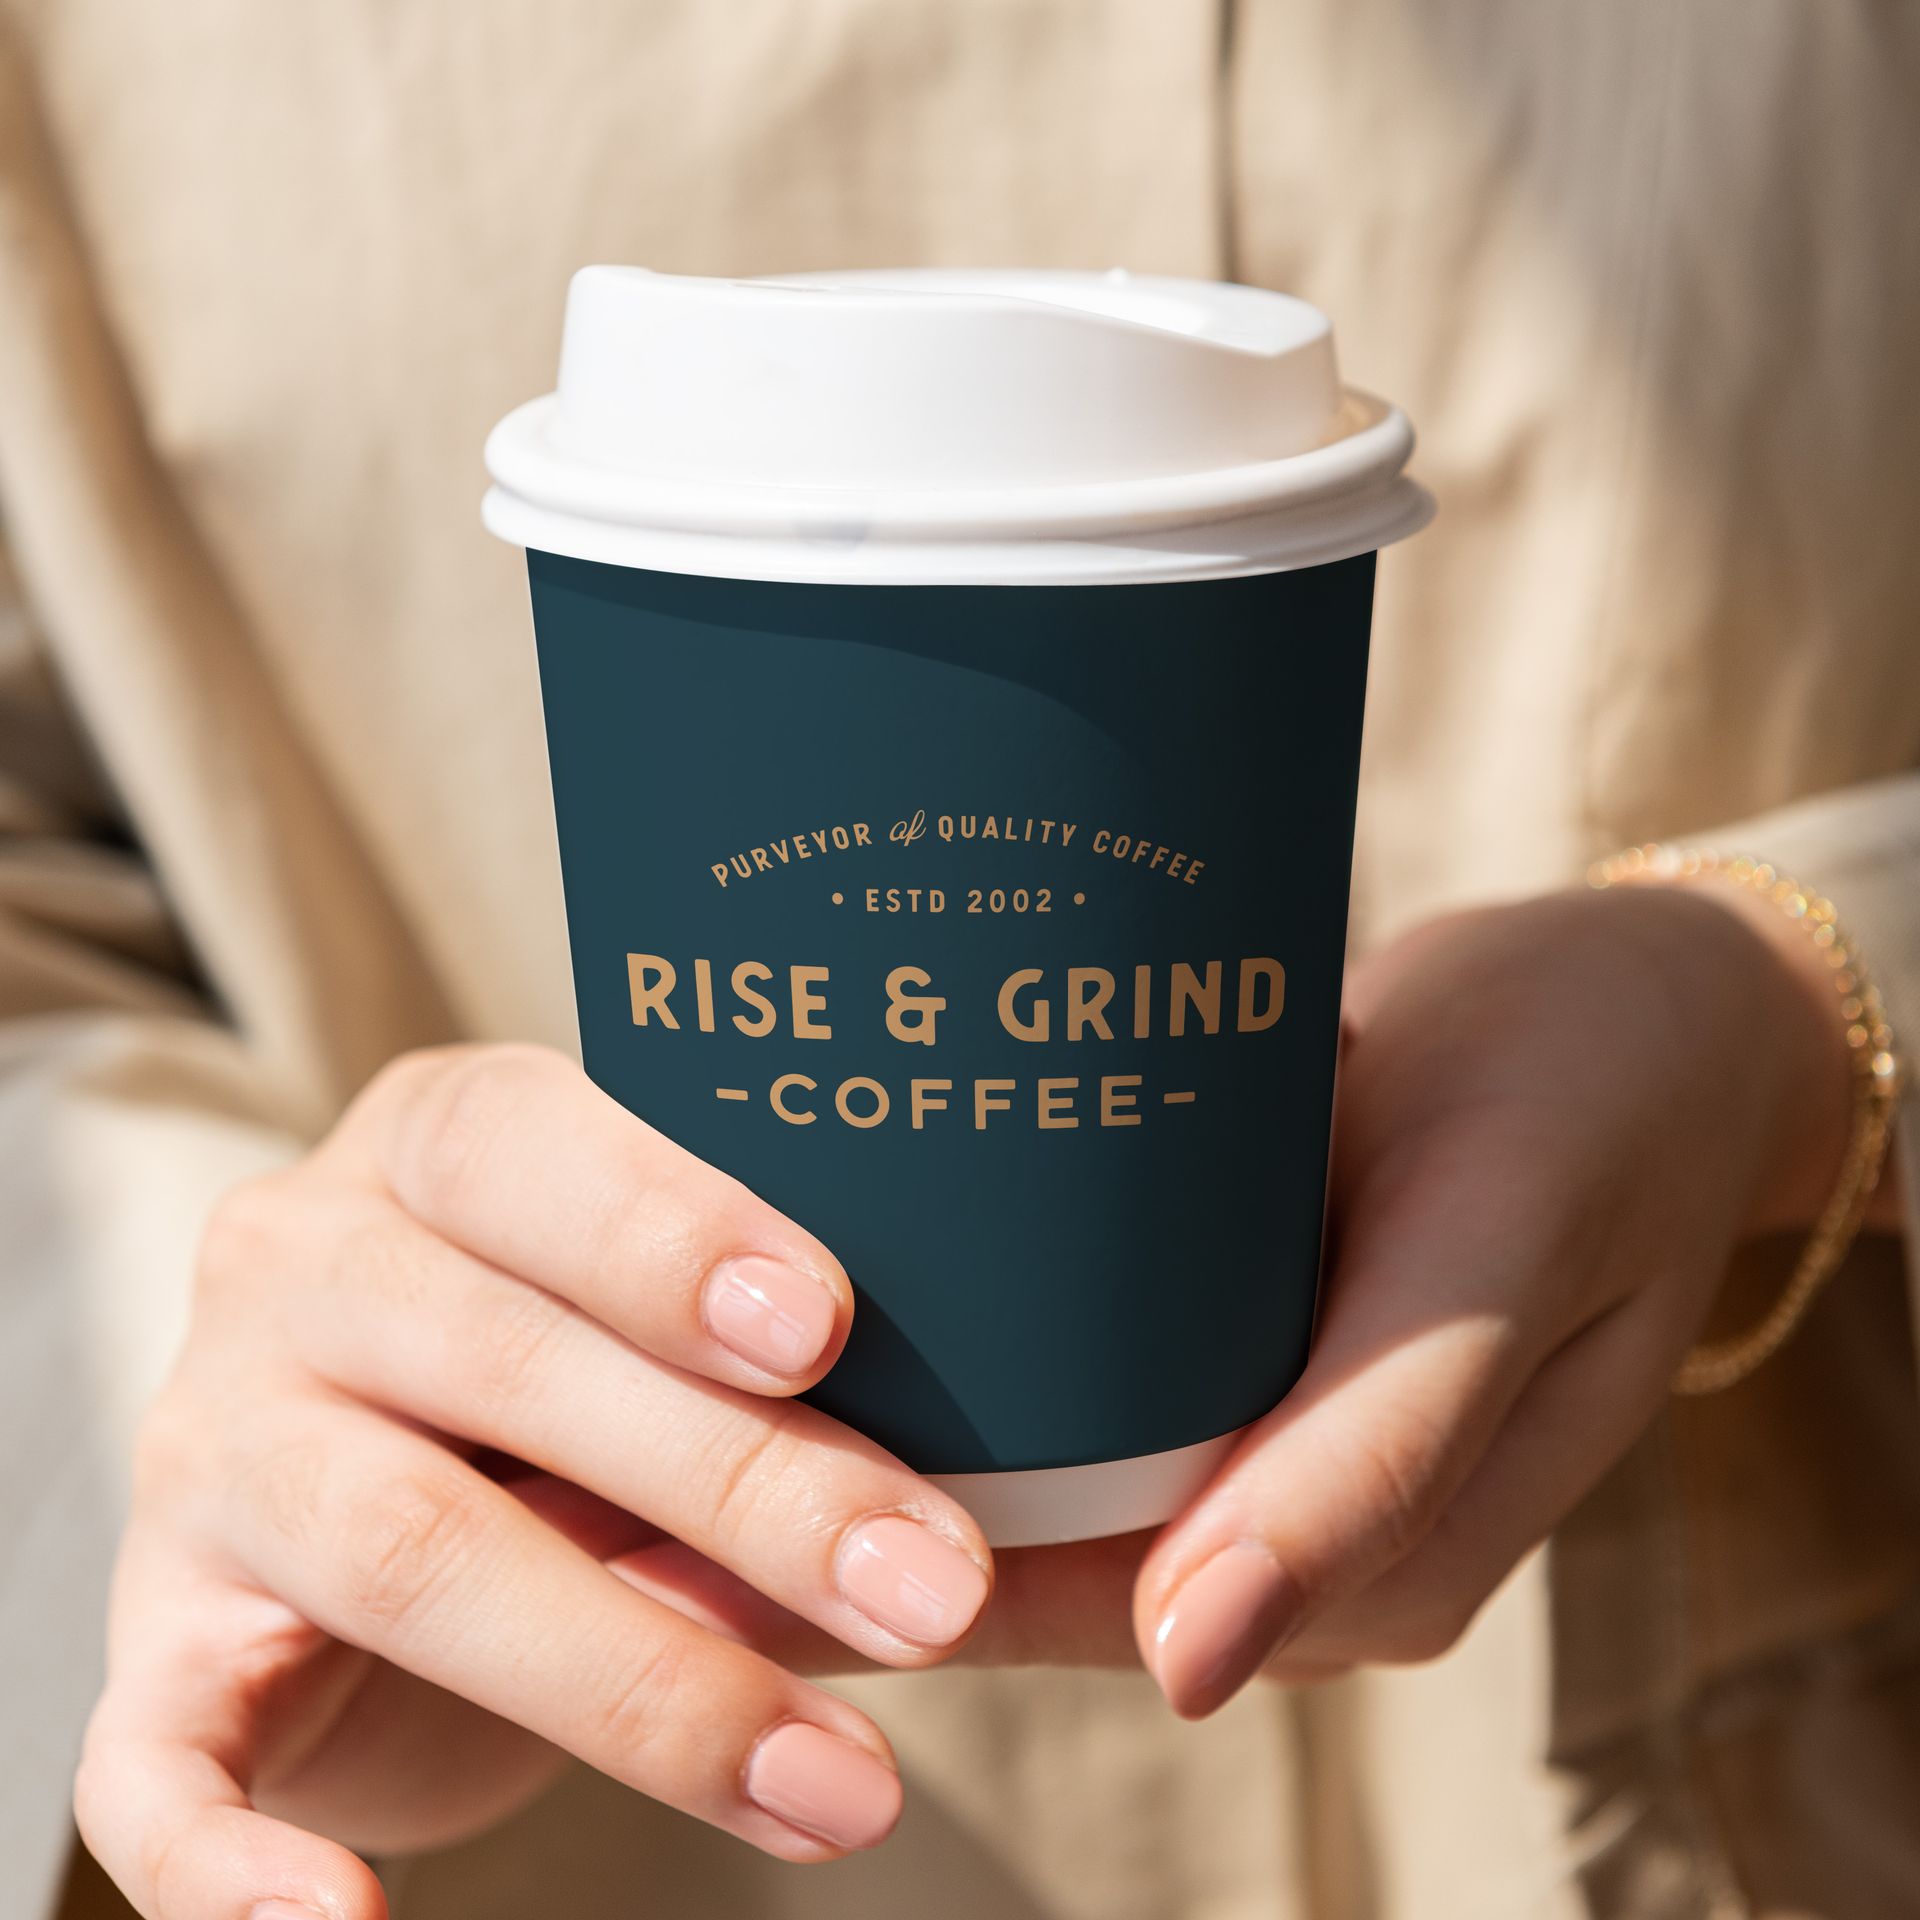 A person is holding a cup of rise & grind coffee